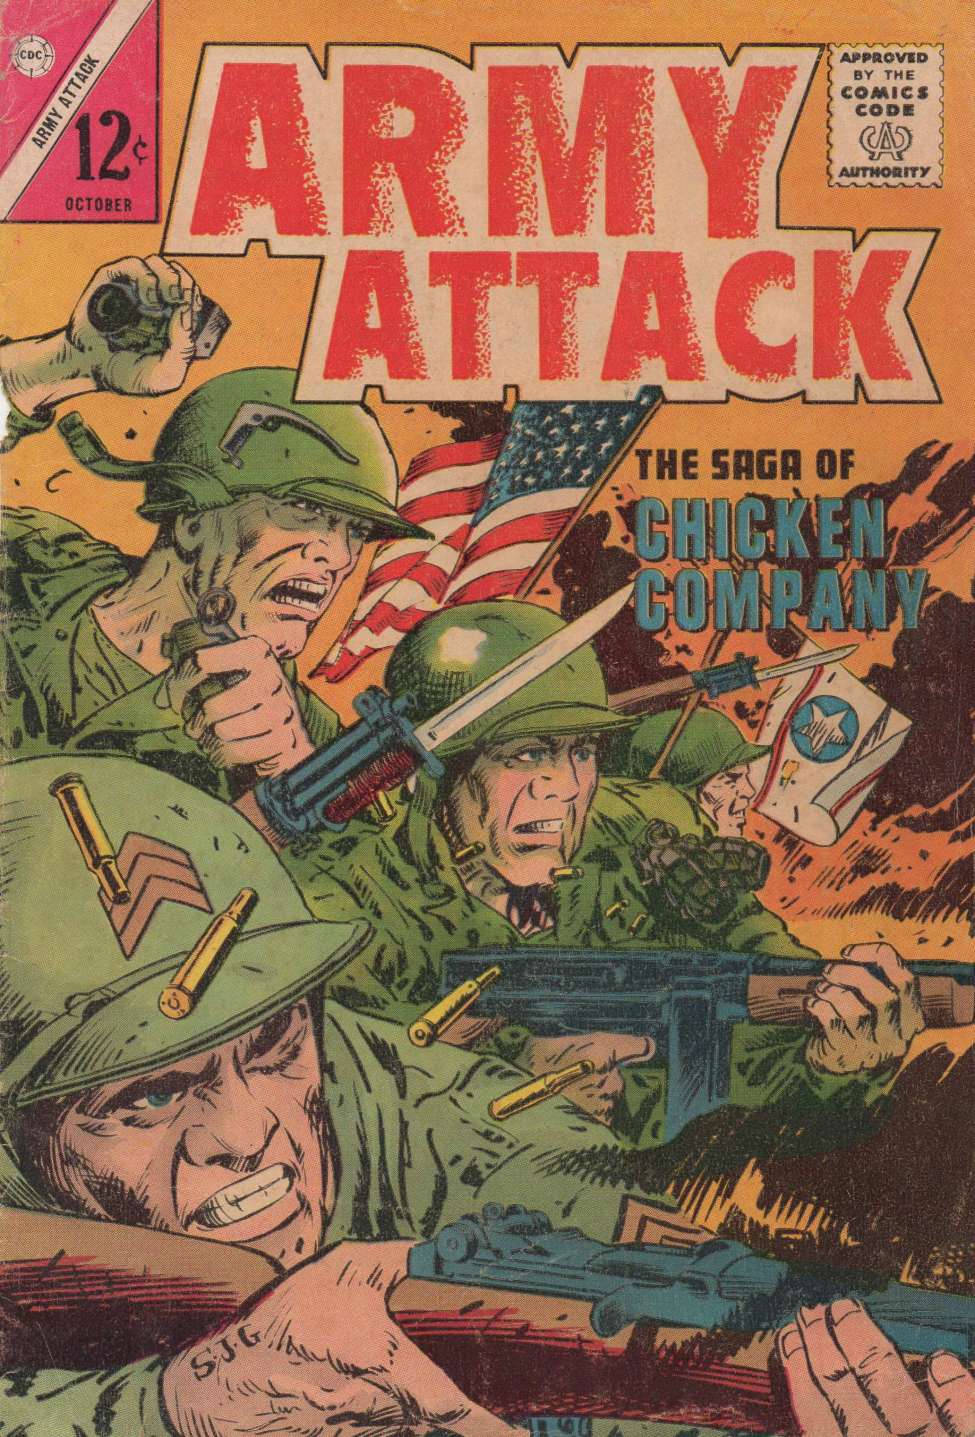 Book Cover For Army Attack 2